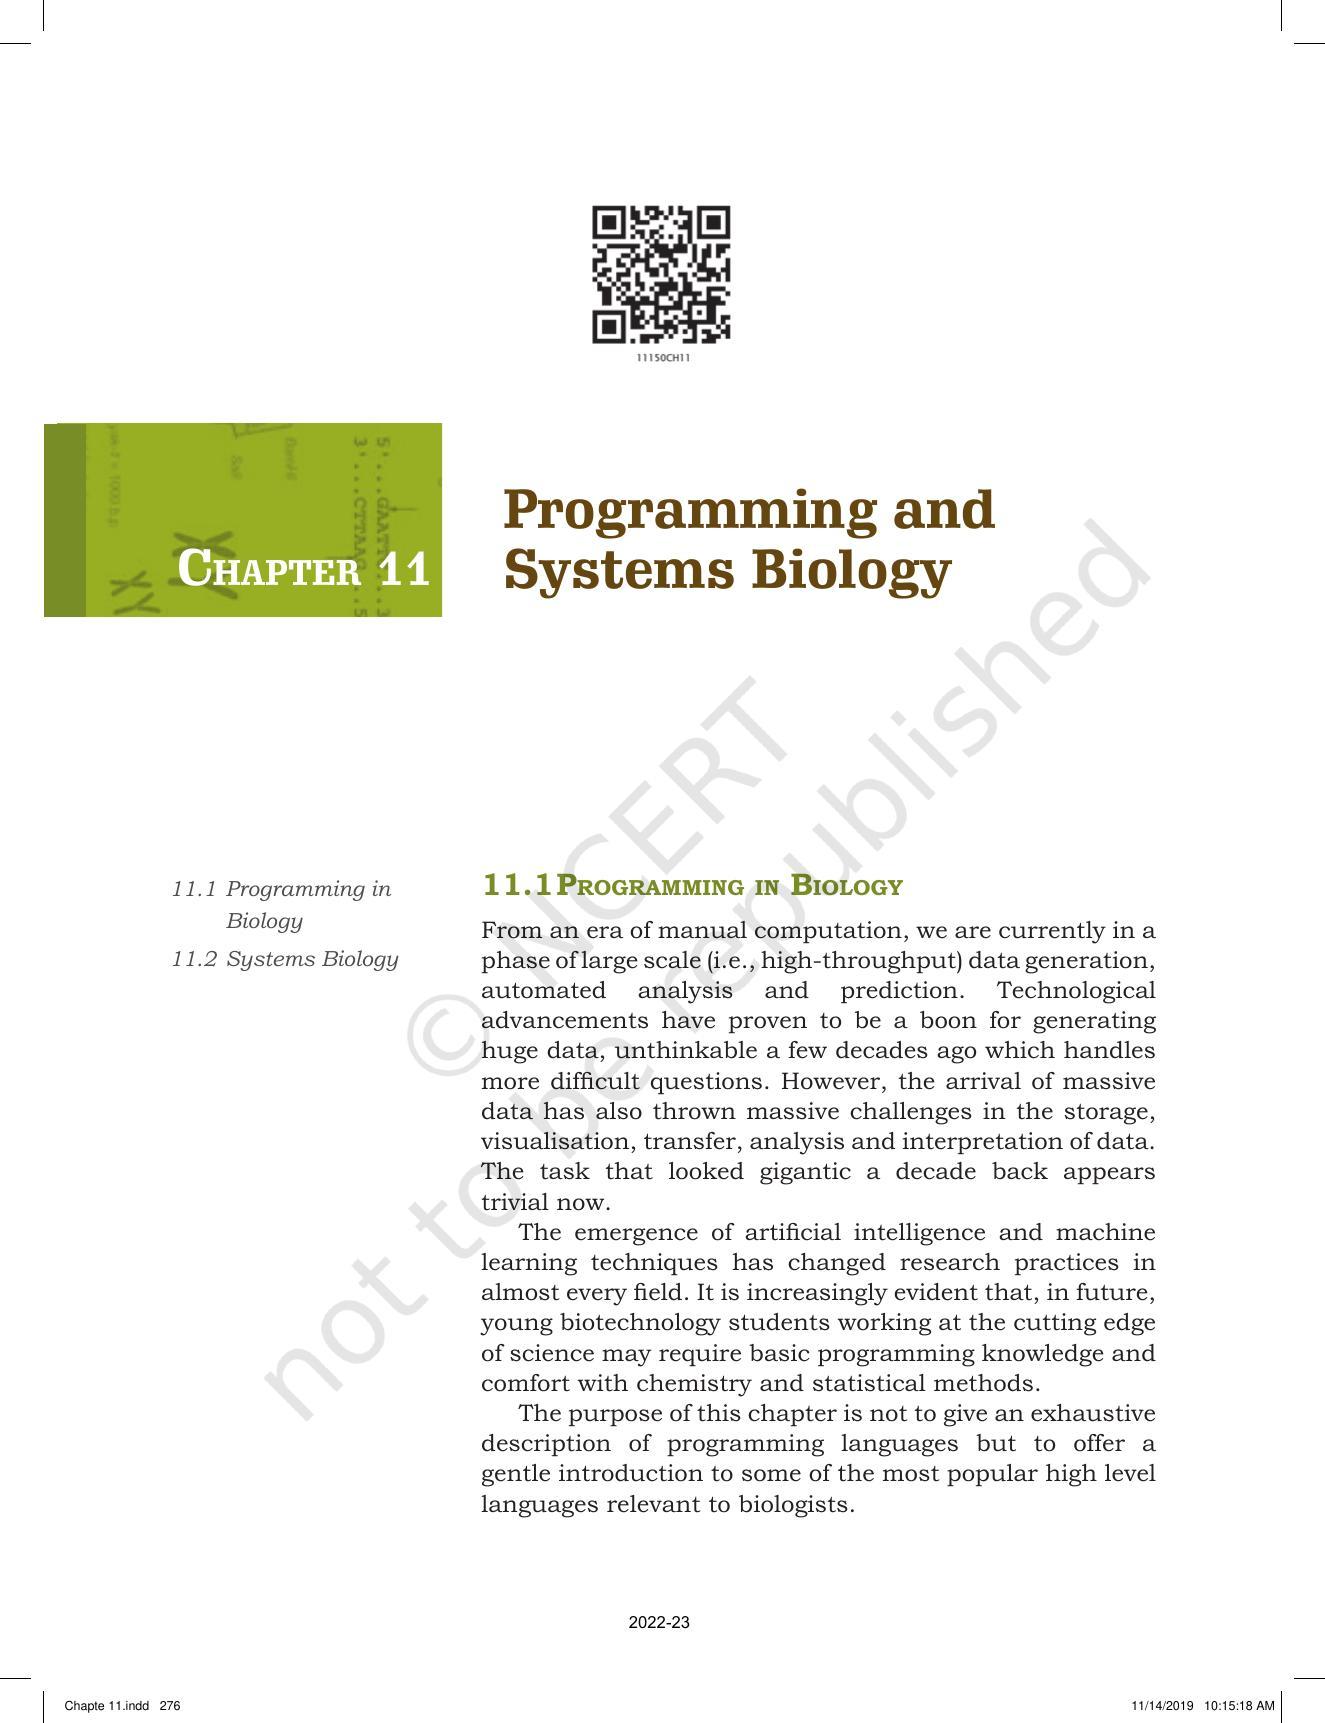 NCERT Book for Class 11 Biotechnology Chapter 11 Programming and Systems Biology - Page 1